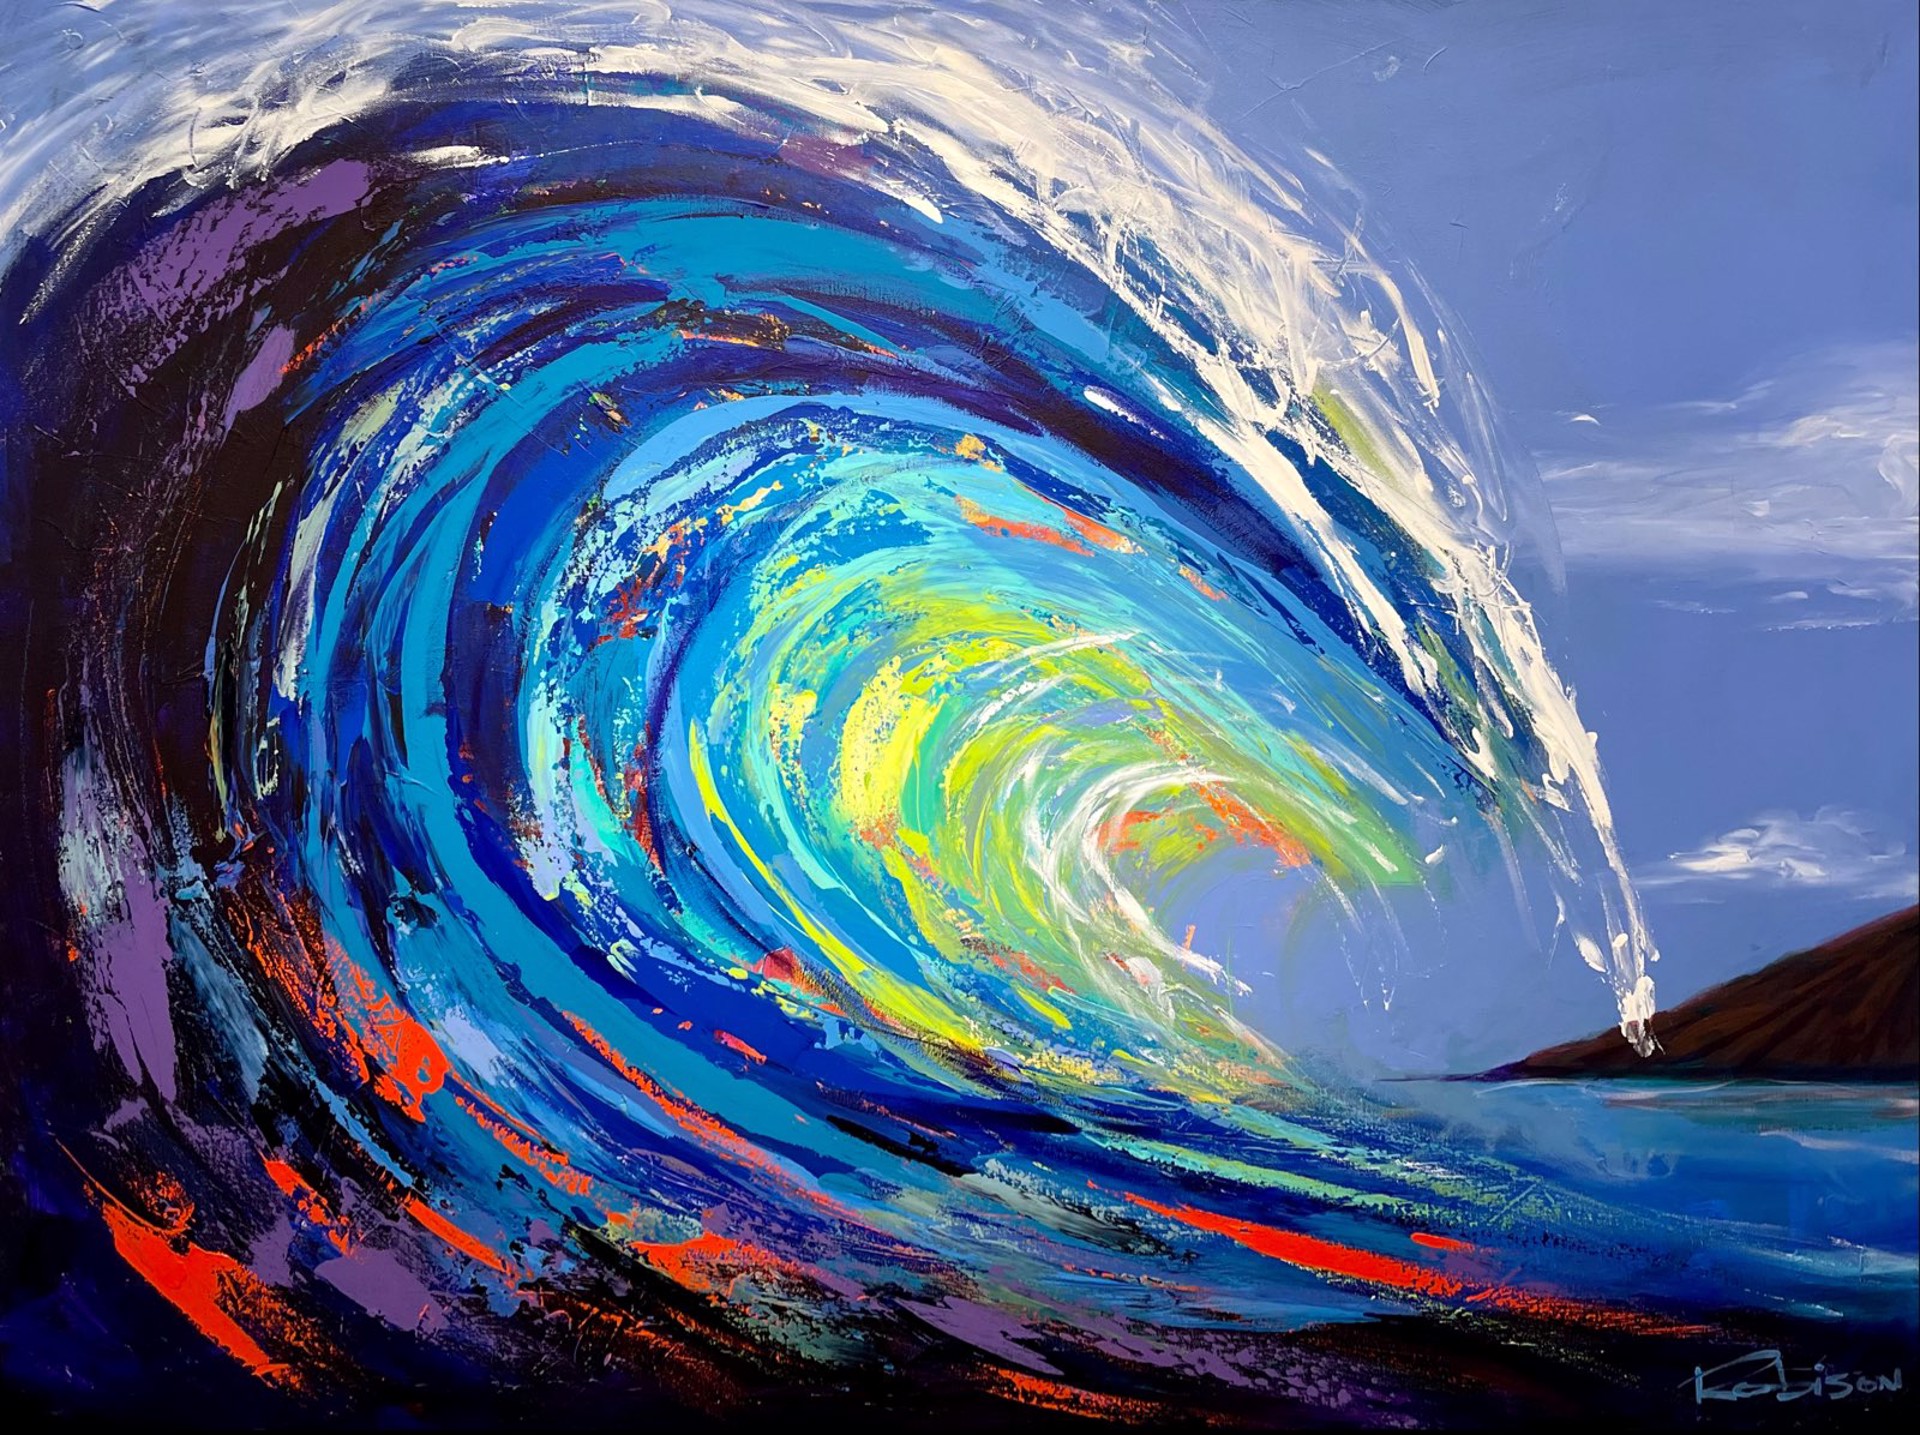 Technicolor Wave #5 by Eric Robison